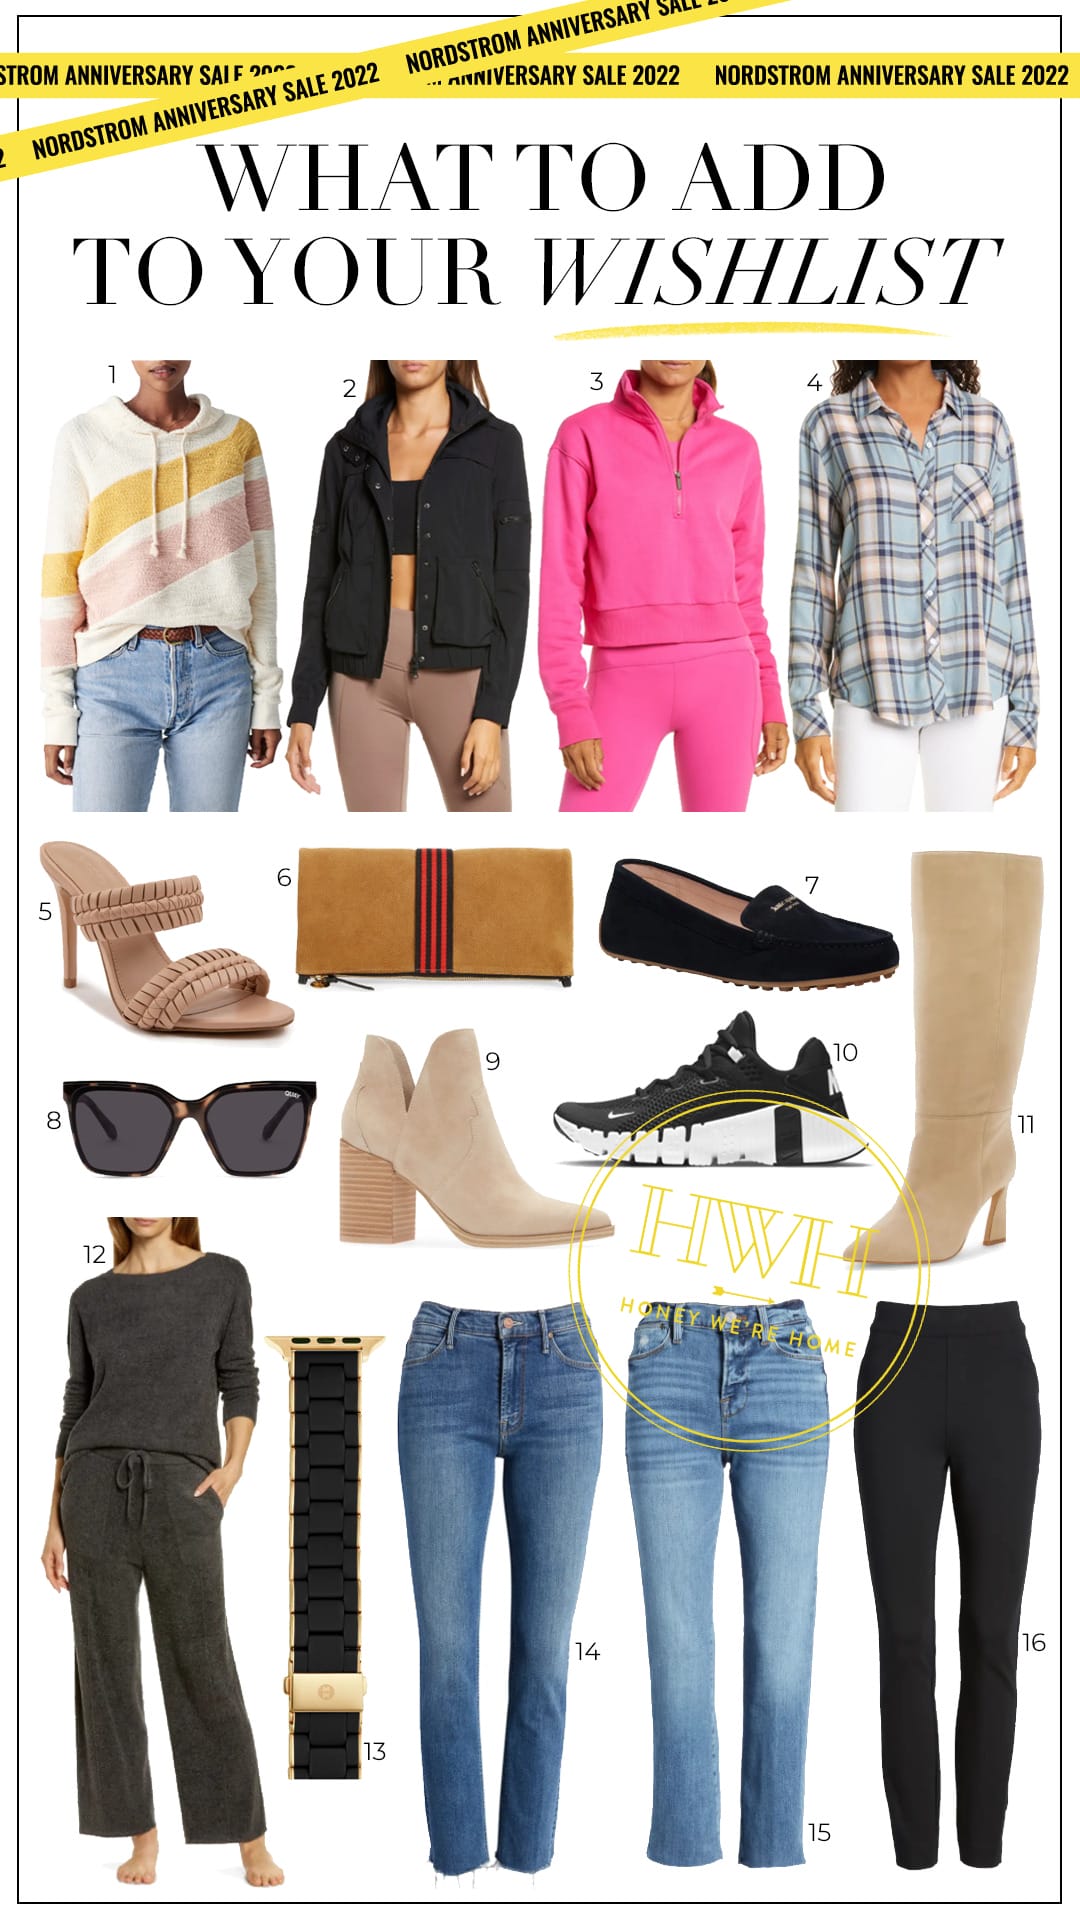 Nordstrom Anniversary Sale - What to Add to Your Wishlist • Honey We're Home